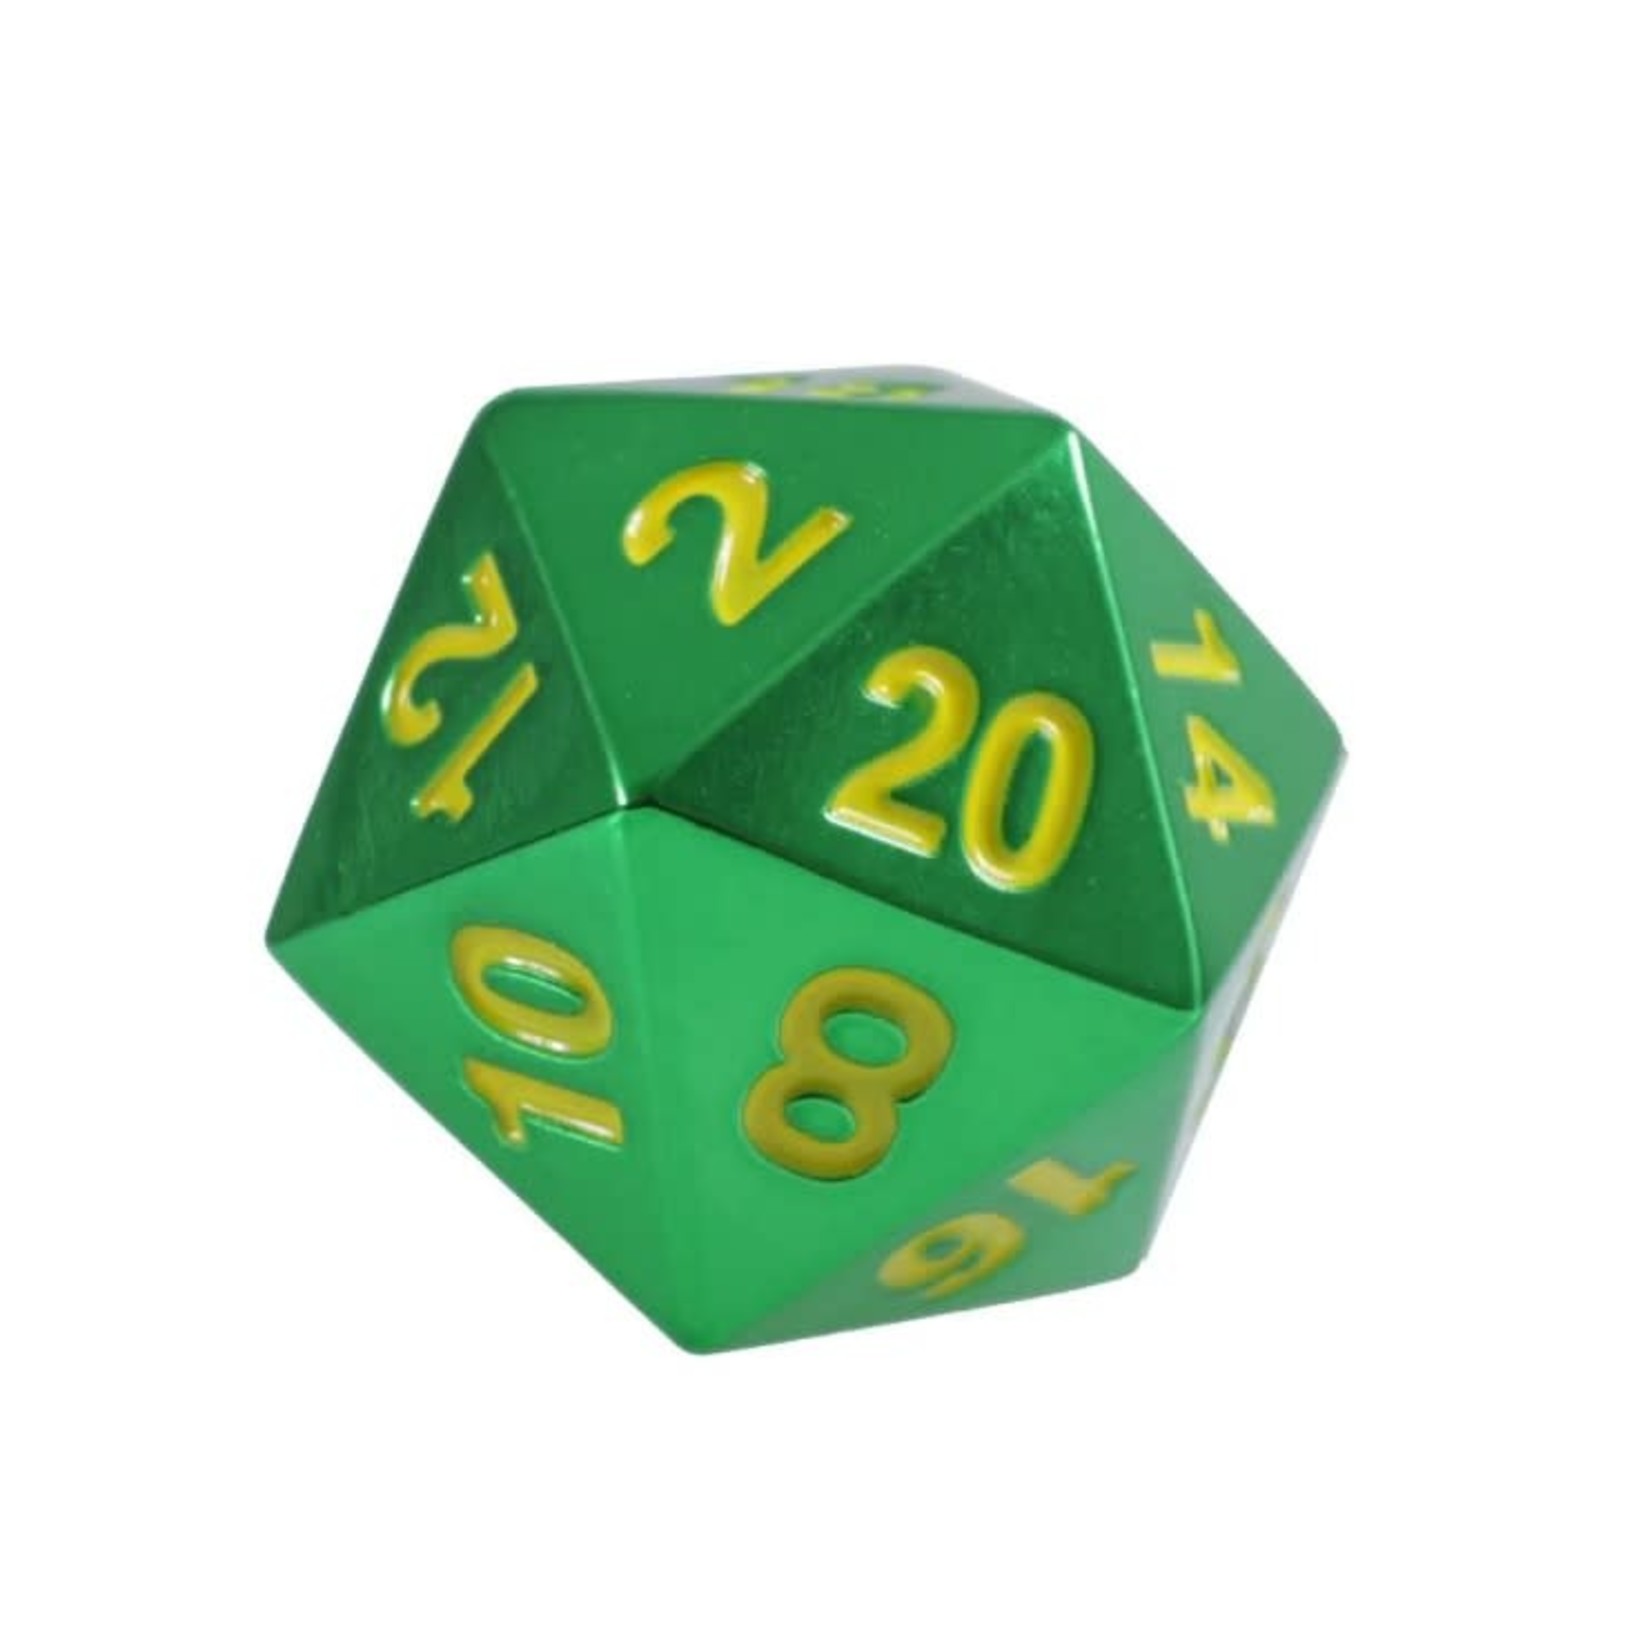 Forged Gaming Set of 10 Metal Dice: Emerald Green